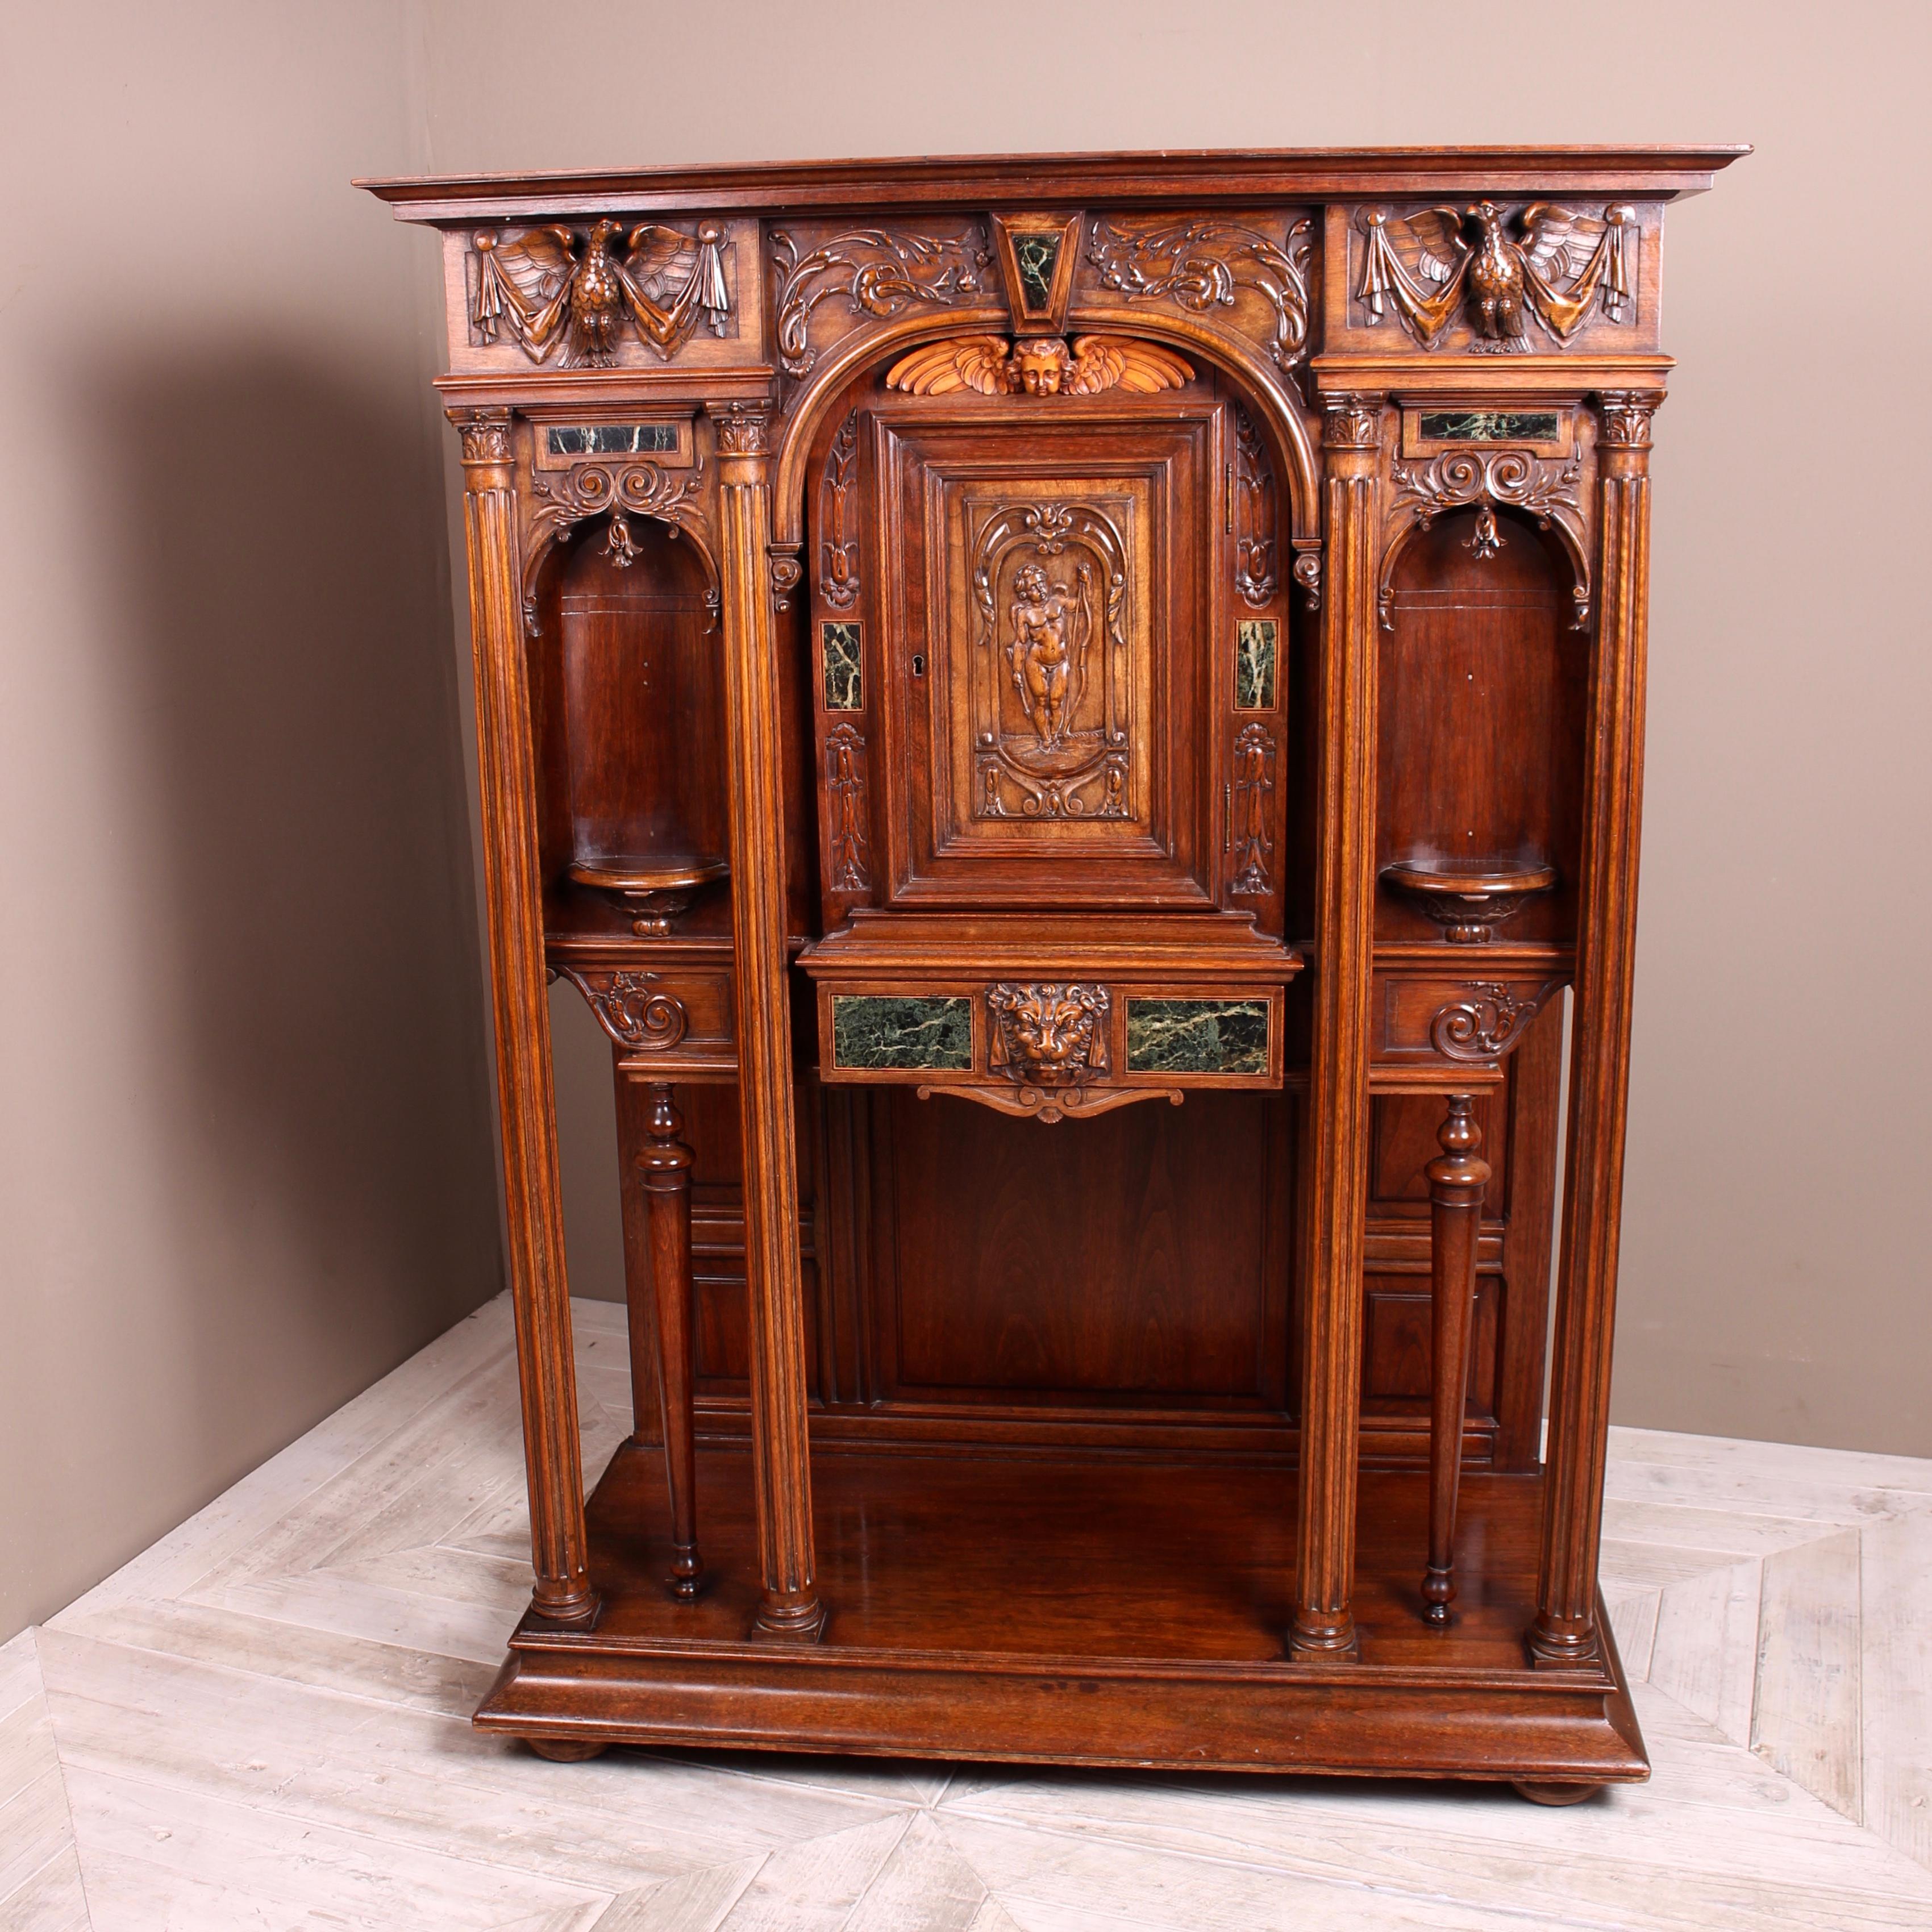 A fine continental carved walnut and marble ecclesiastical cabinet, circa 1890. A beautiful statement piece in heavily carved walnut and inset marble panels. The upper cornice with central floral and marble decoration flanked by classical phoenix